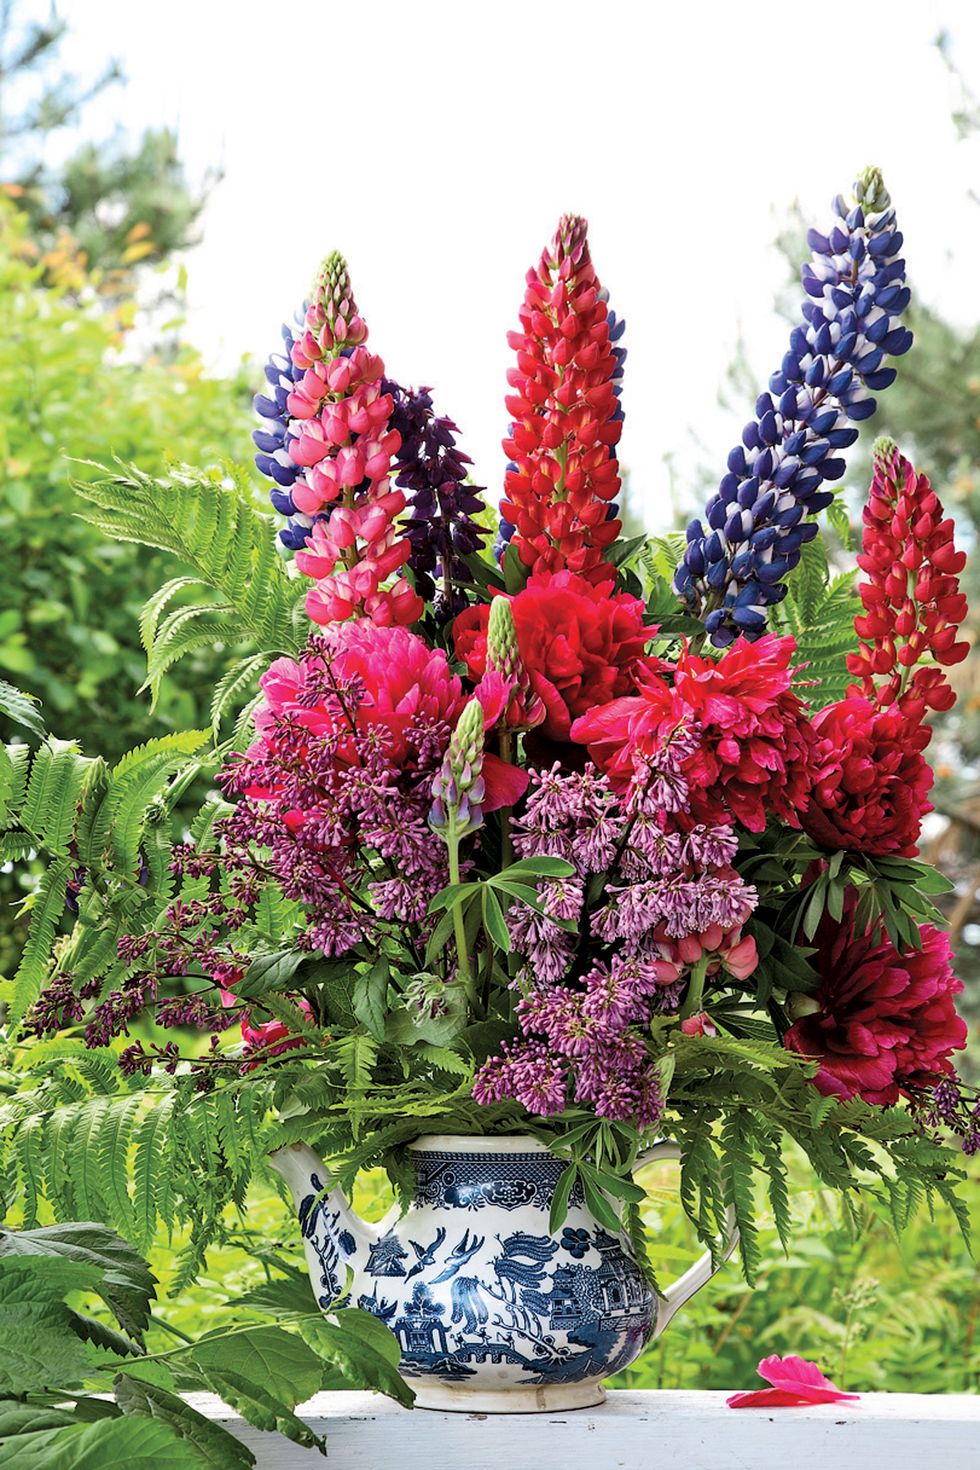 Flower, Flowering plant, Plant, Lupin, Botany, poker primrose, Amaranth family, Foxtail lily, Annual plant, Delphinium, 